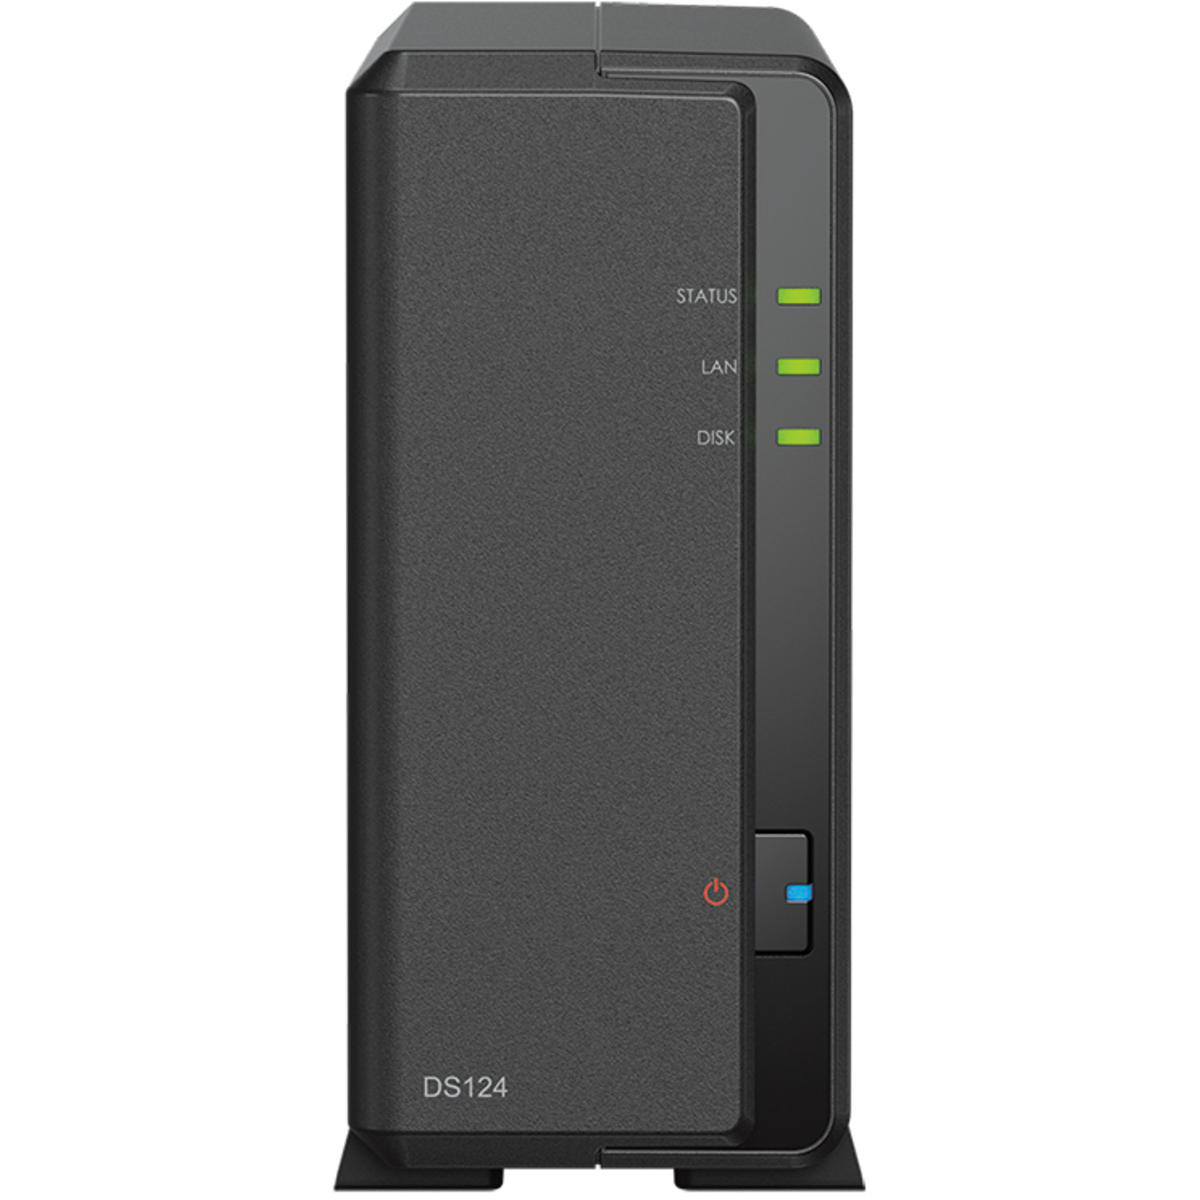 Synology DiskStation DS124 4tb 1-Bay Desktop Personal / Basic Home / Small Office NAS - Network Attached Storage Device 1x4tb Western Digital Red Pro WD4005FFBX 3.5 7200rpm SATA 6Gb/s HDD NAS Class Drives Installed - Burn-In Tested DiskStation DS124